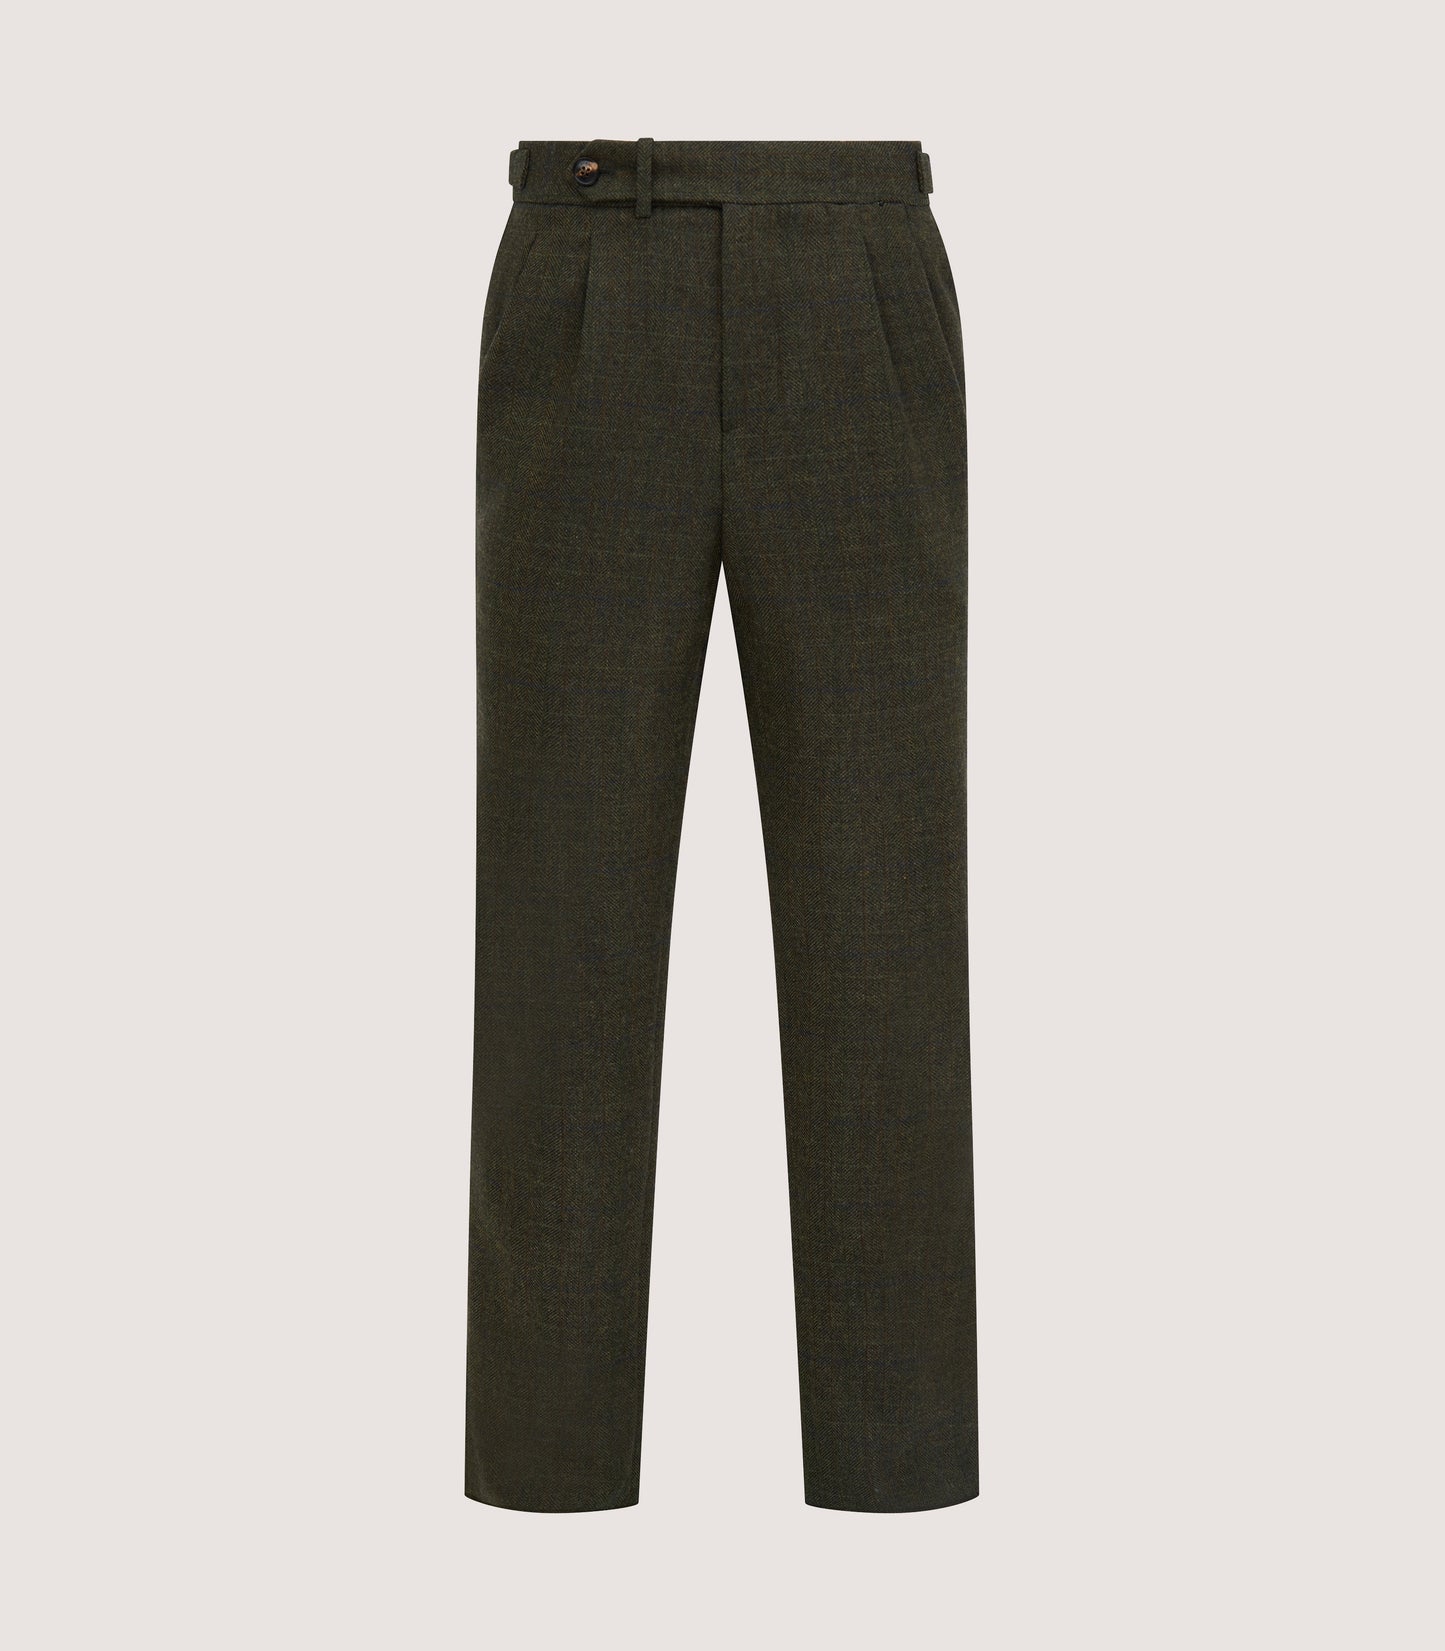 Men's Technical Tweed Two Pleat Sporting Trousers In Strathbeg